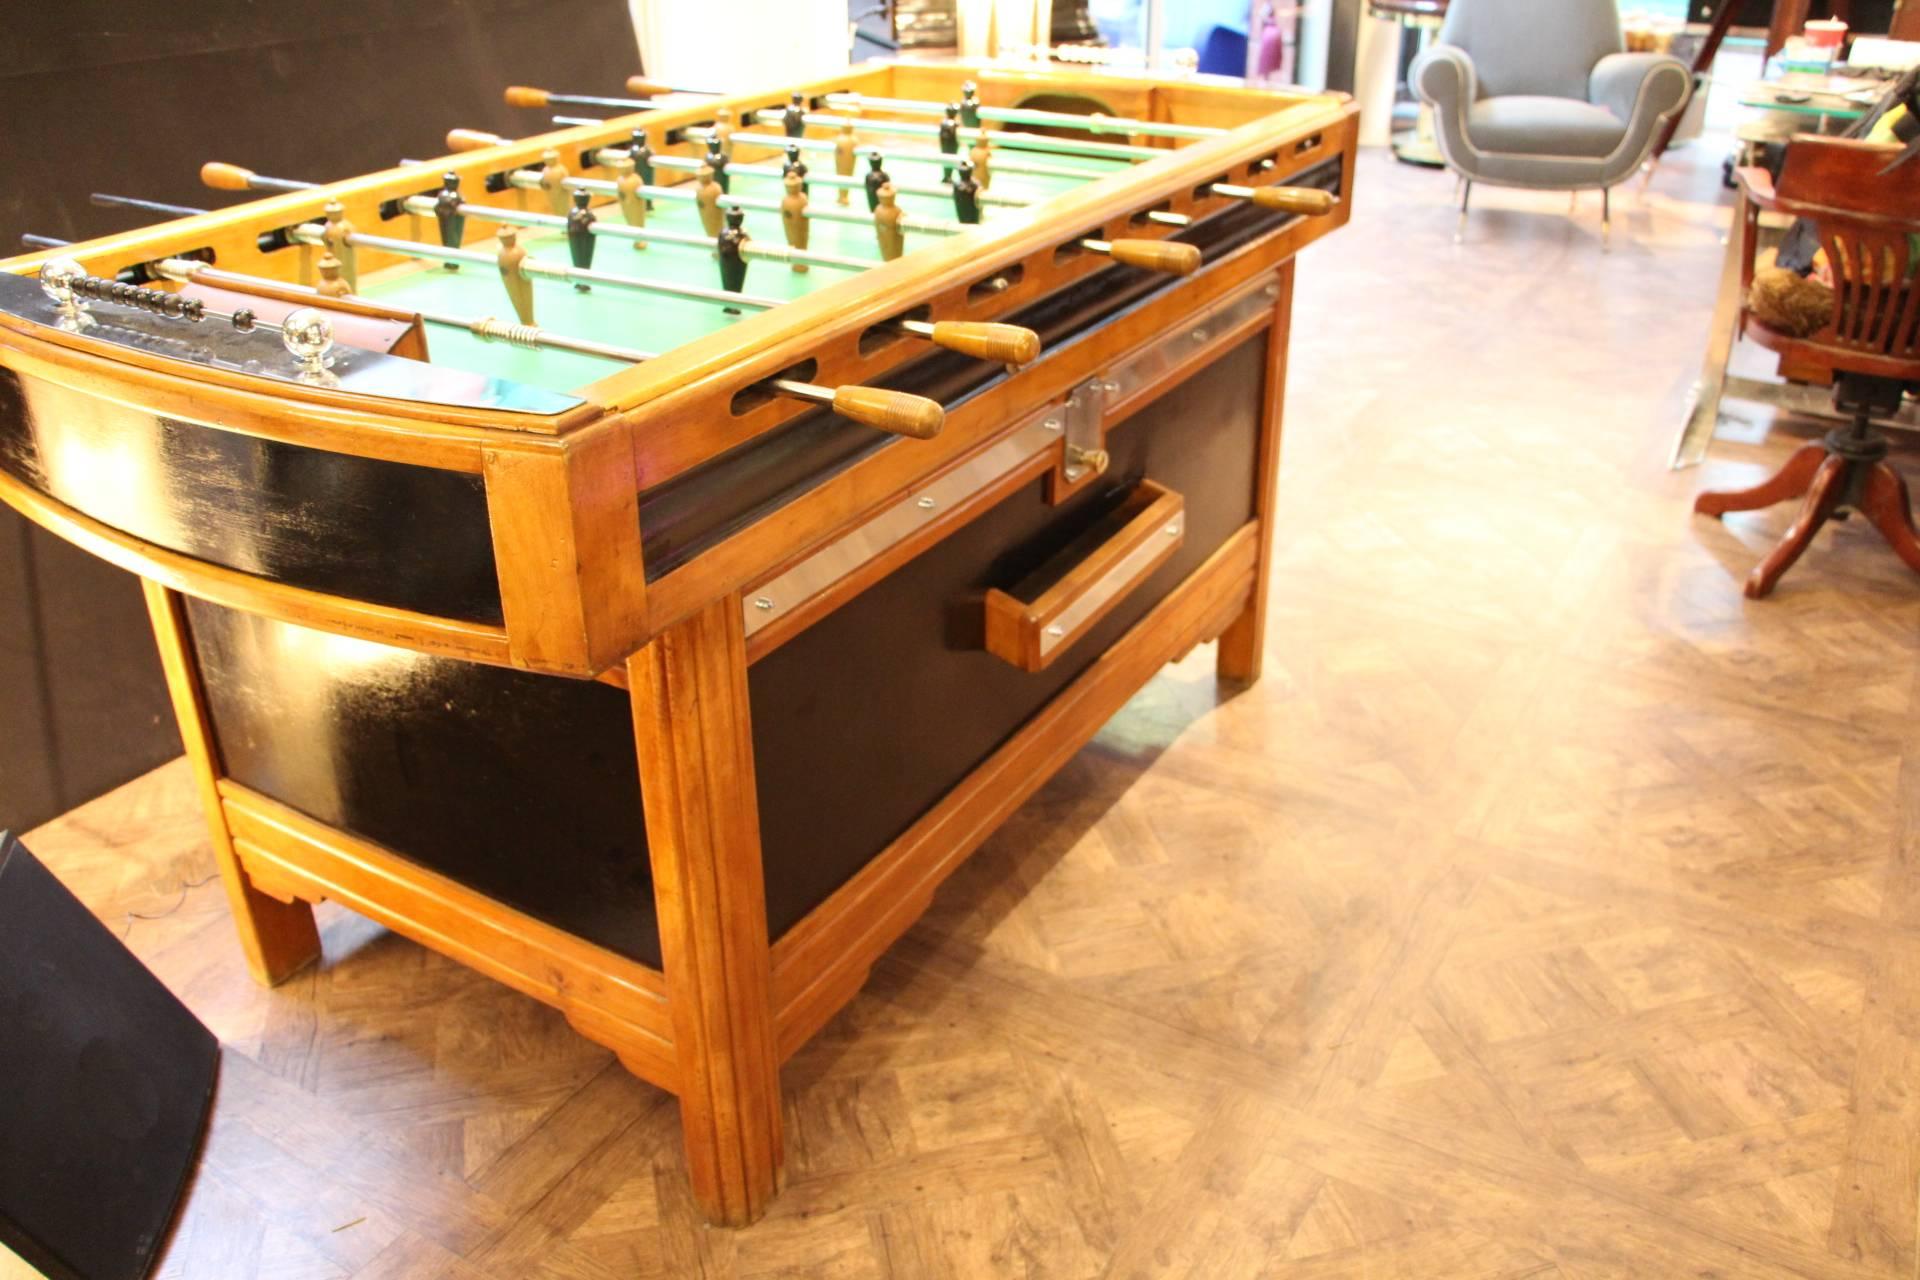 This typically French café’s foosball table is a magnificent piece, very elegant in all interiors and very fun because you can play hours long!!
Original players in carved wood, aluminum fittings, original green field.
Moreover the contrast of